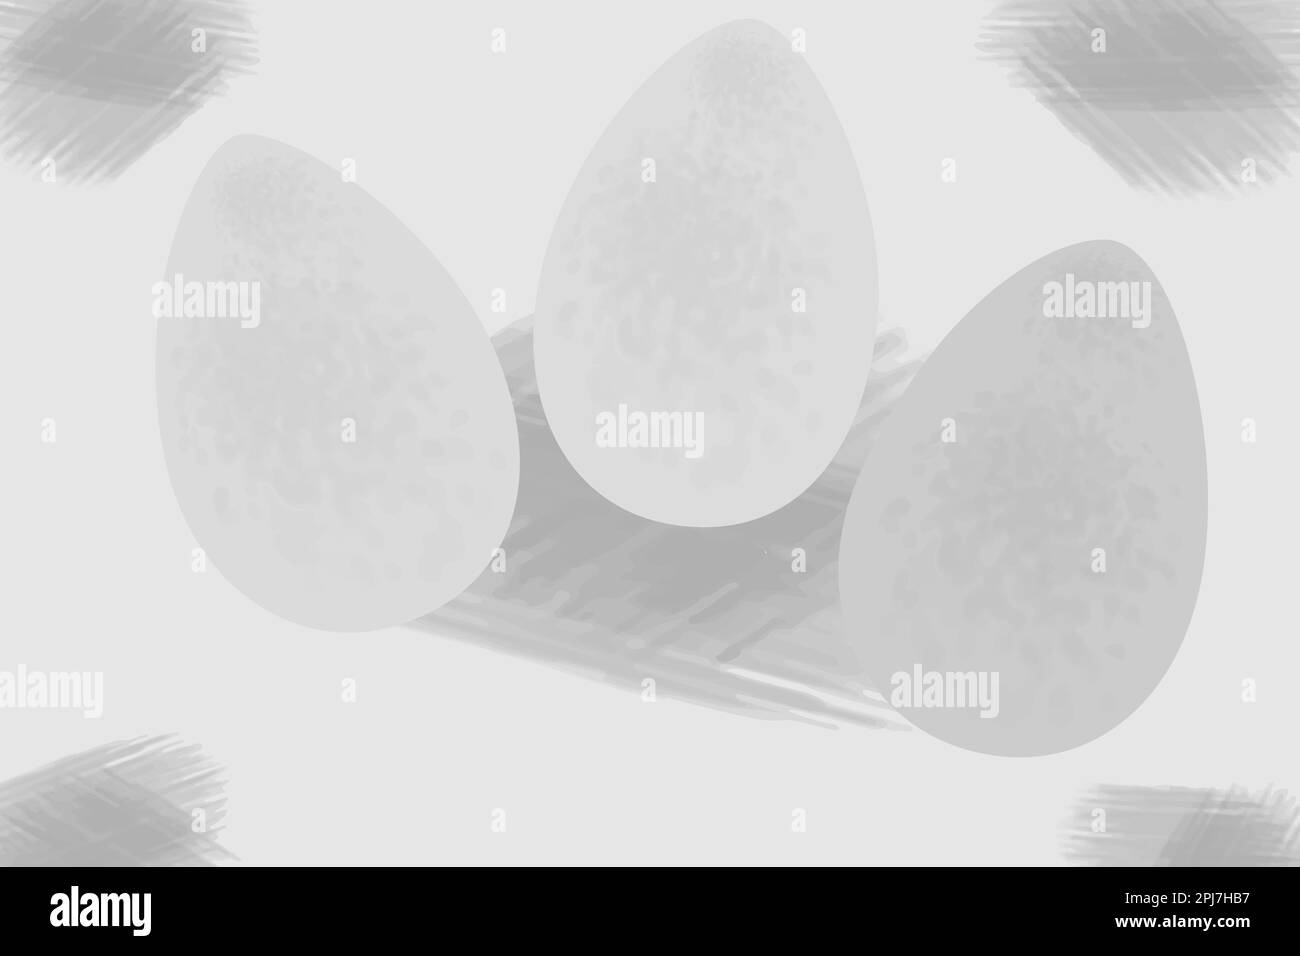 3 Easter Eggs on Abstract background texture with freehand hatching in grayscale. Doodle style. Pen stroke scribble. Hand drawn scrawl sketch texture. Happy Easter. Design for lettering or cards. EPS Stock Vector